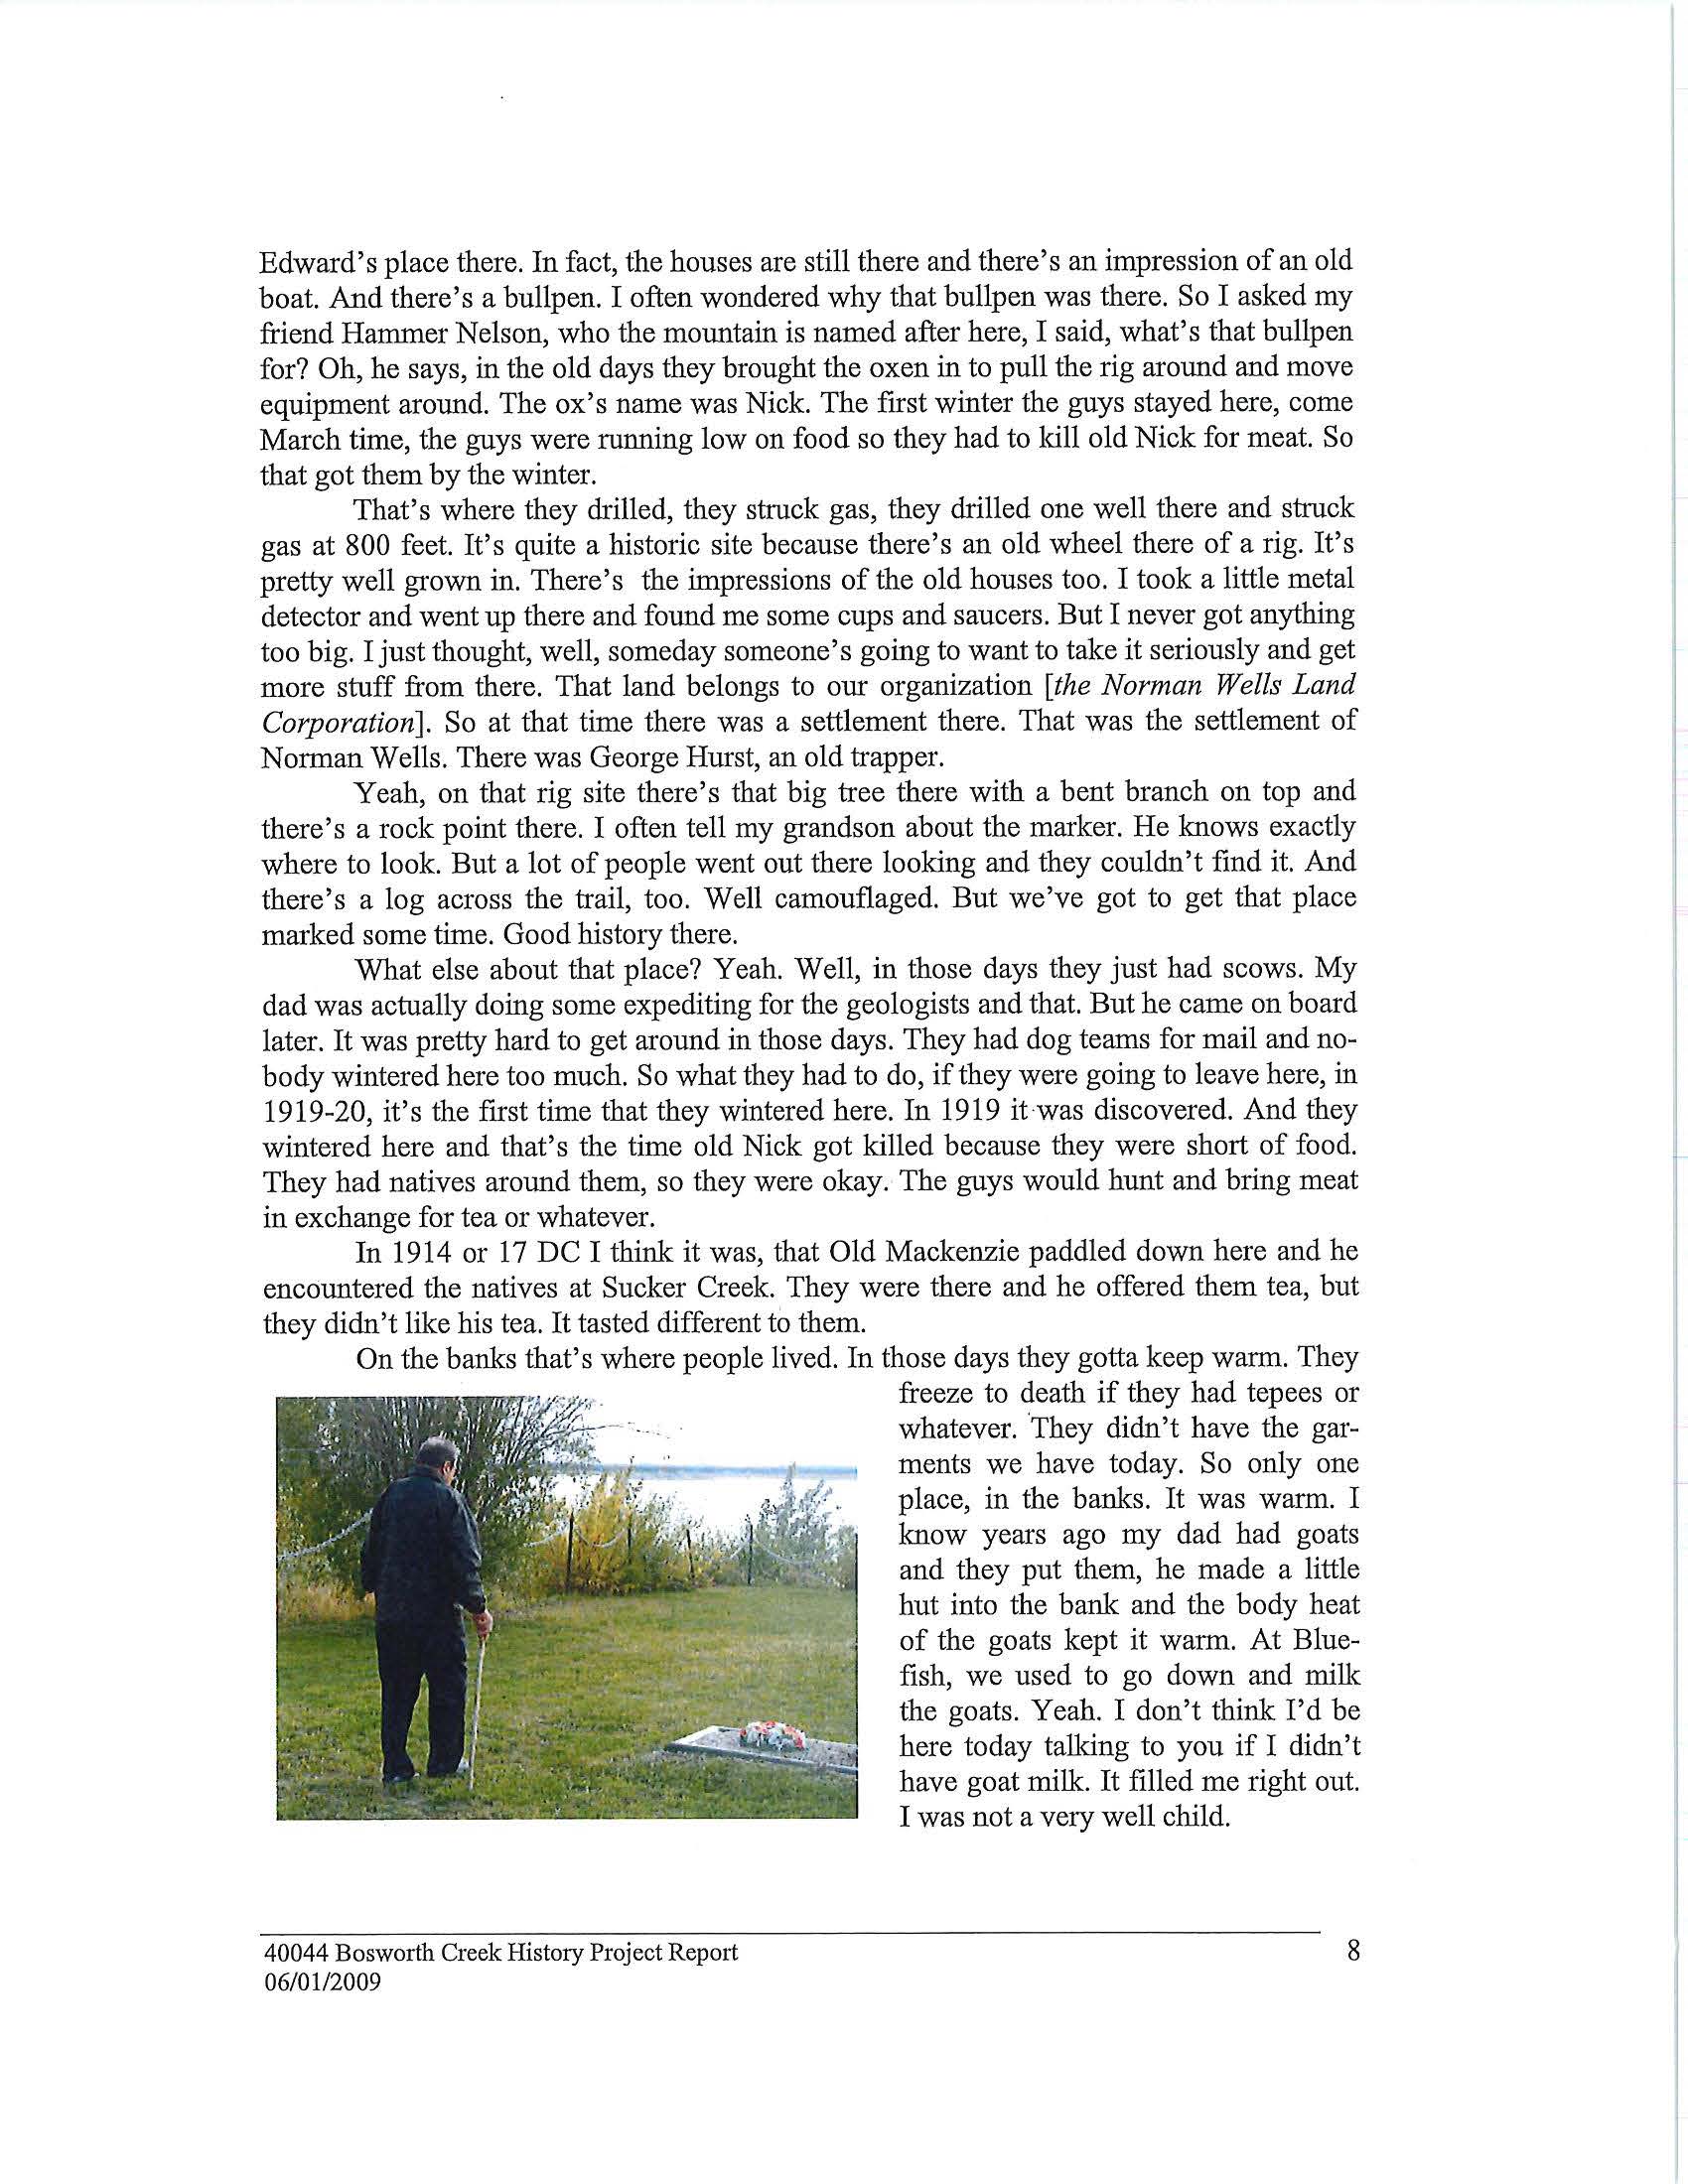 Bosworth Creek History Project Page 13